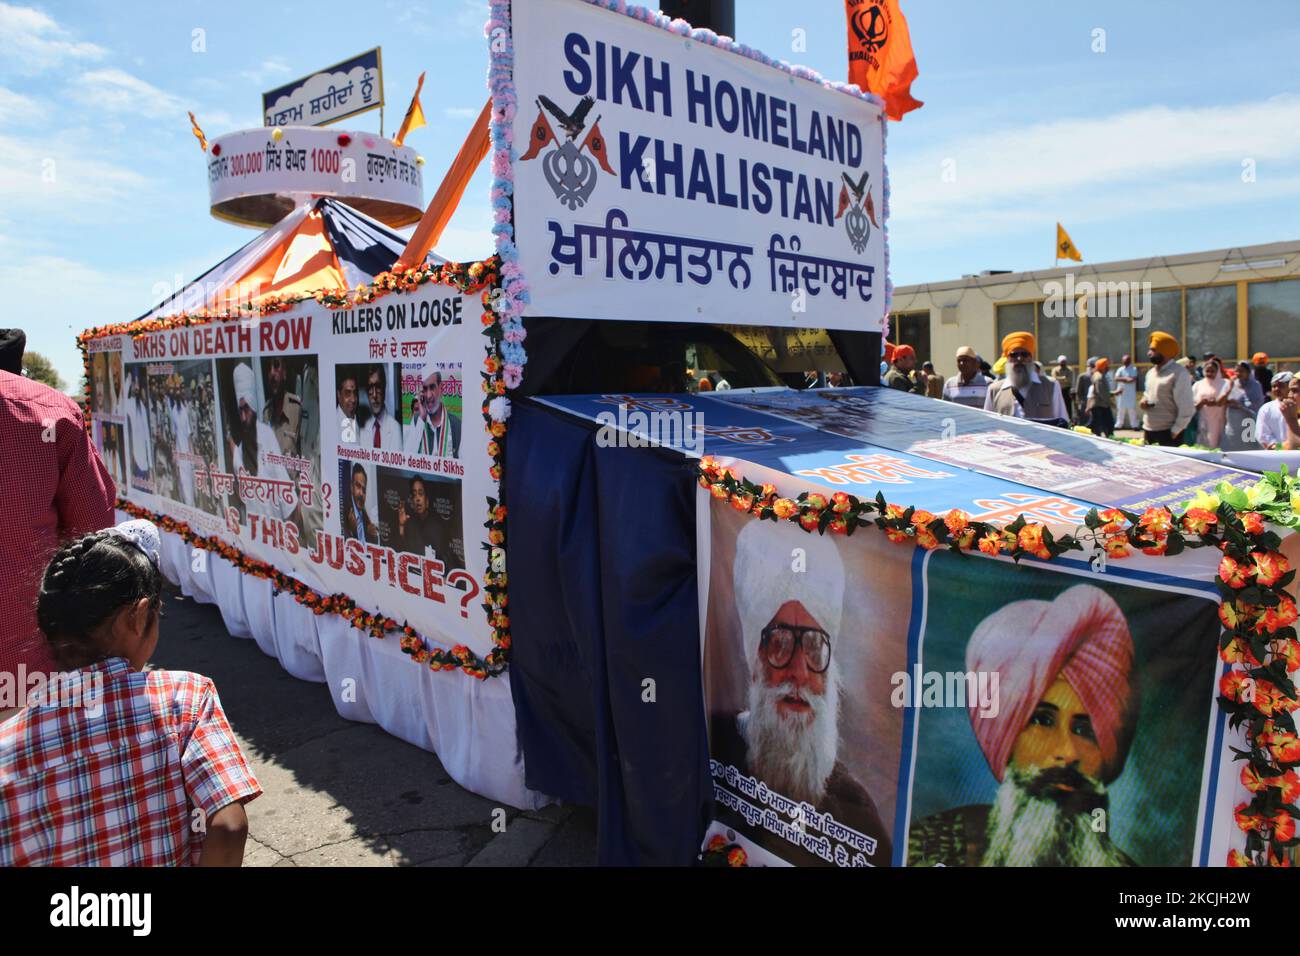 Canadian Pro-Khalistan Sikhs protest against the Indian government in Malton, Mississauga, Ontario, Canada, on May 06, 2012. Thousands of Sikhs attended a Nagar Kirtan to celebrate Vaisakhi and to show their discontent with the Indian government. The Khalistan movement refers to a movement which seeks to create a separate Sikh state, called Khalistan in the Punjab region of India. The territorial definition of the proposed nation is disputed, with some believing it should be carved simply out of the Indian state of Punjab, where Sikhs are the majority population. The Khalistan movement has bee Stock Photo